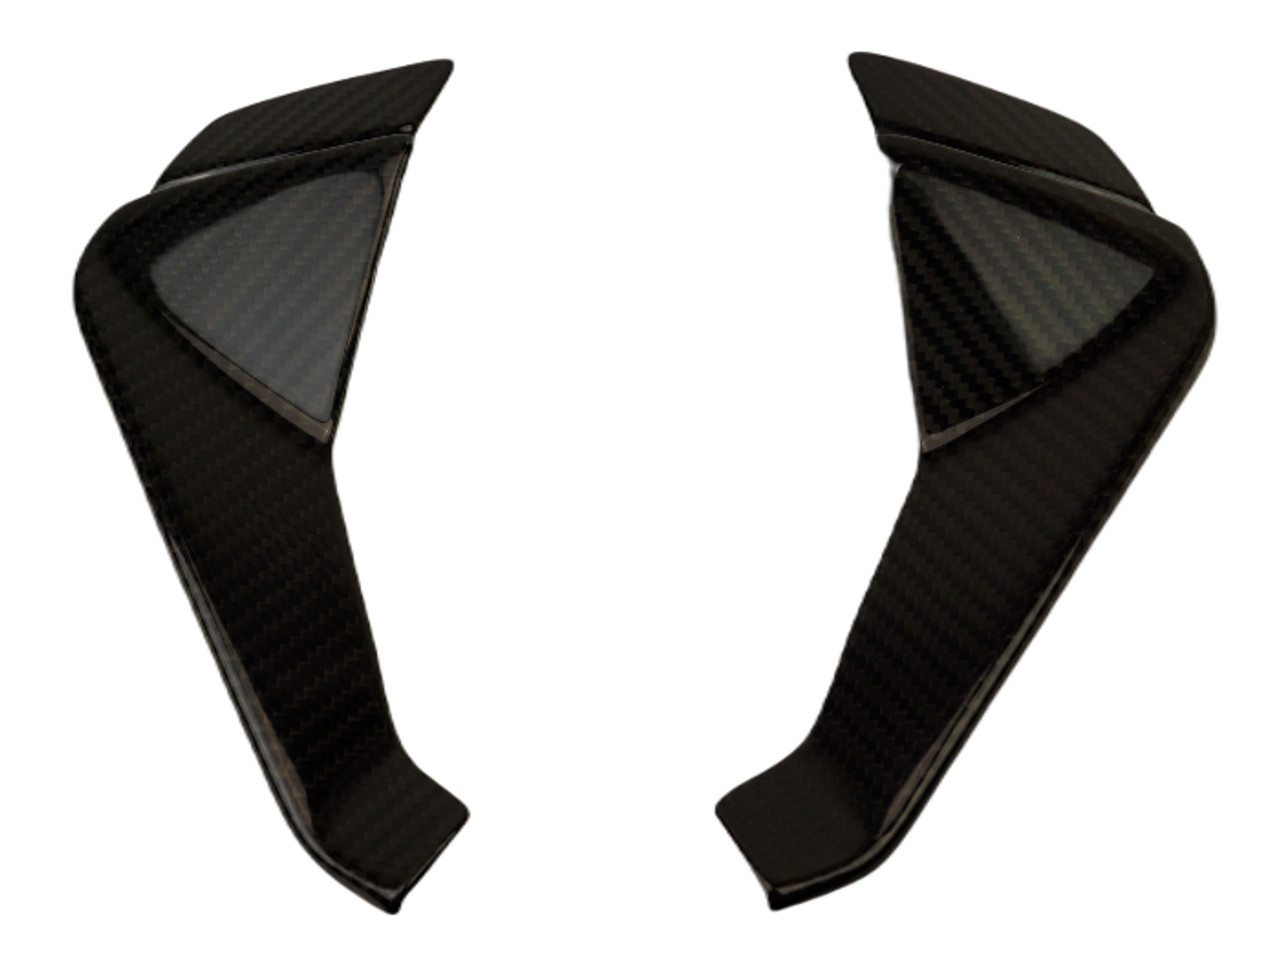 Air Intake Covers in Glossy Twill Weave Carbon Fiber for Aprilia RS660

